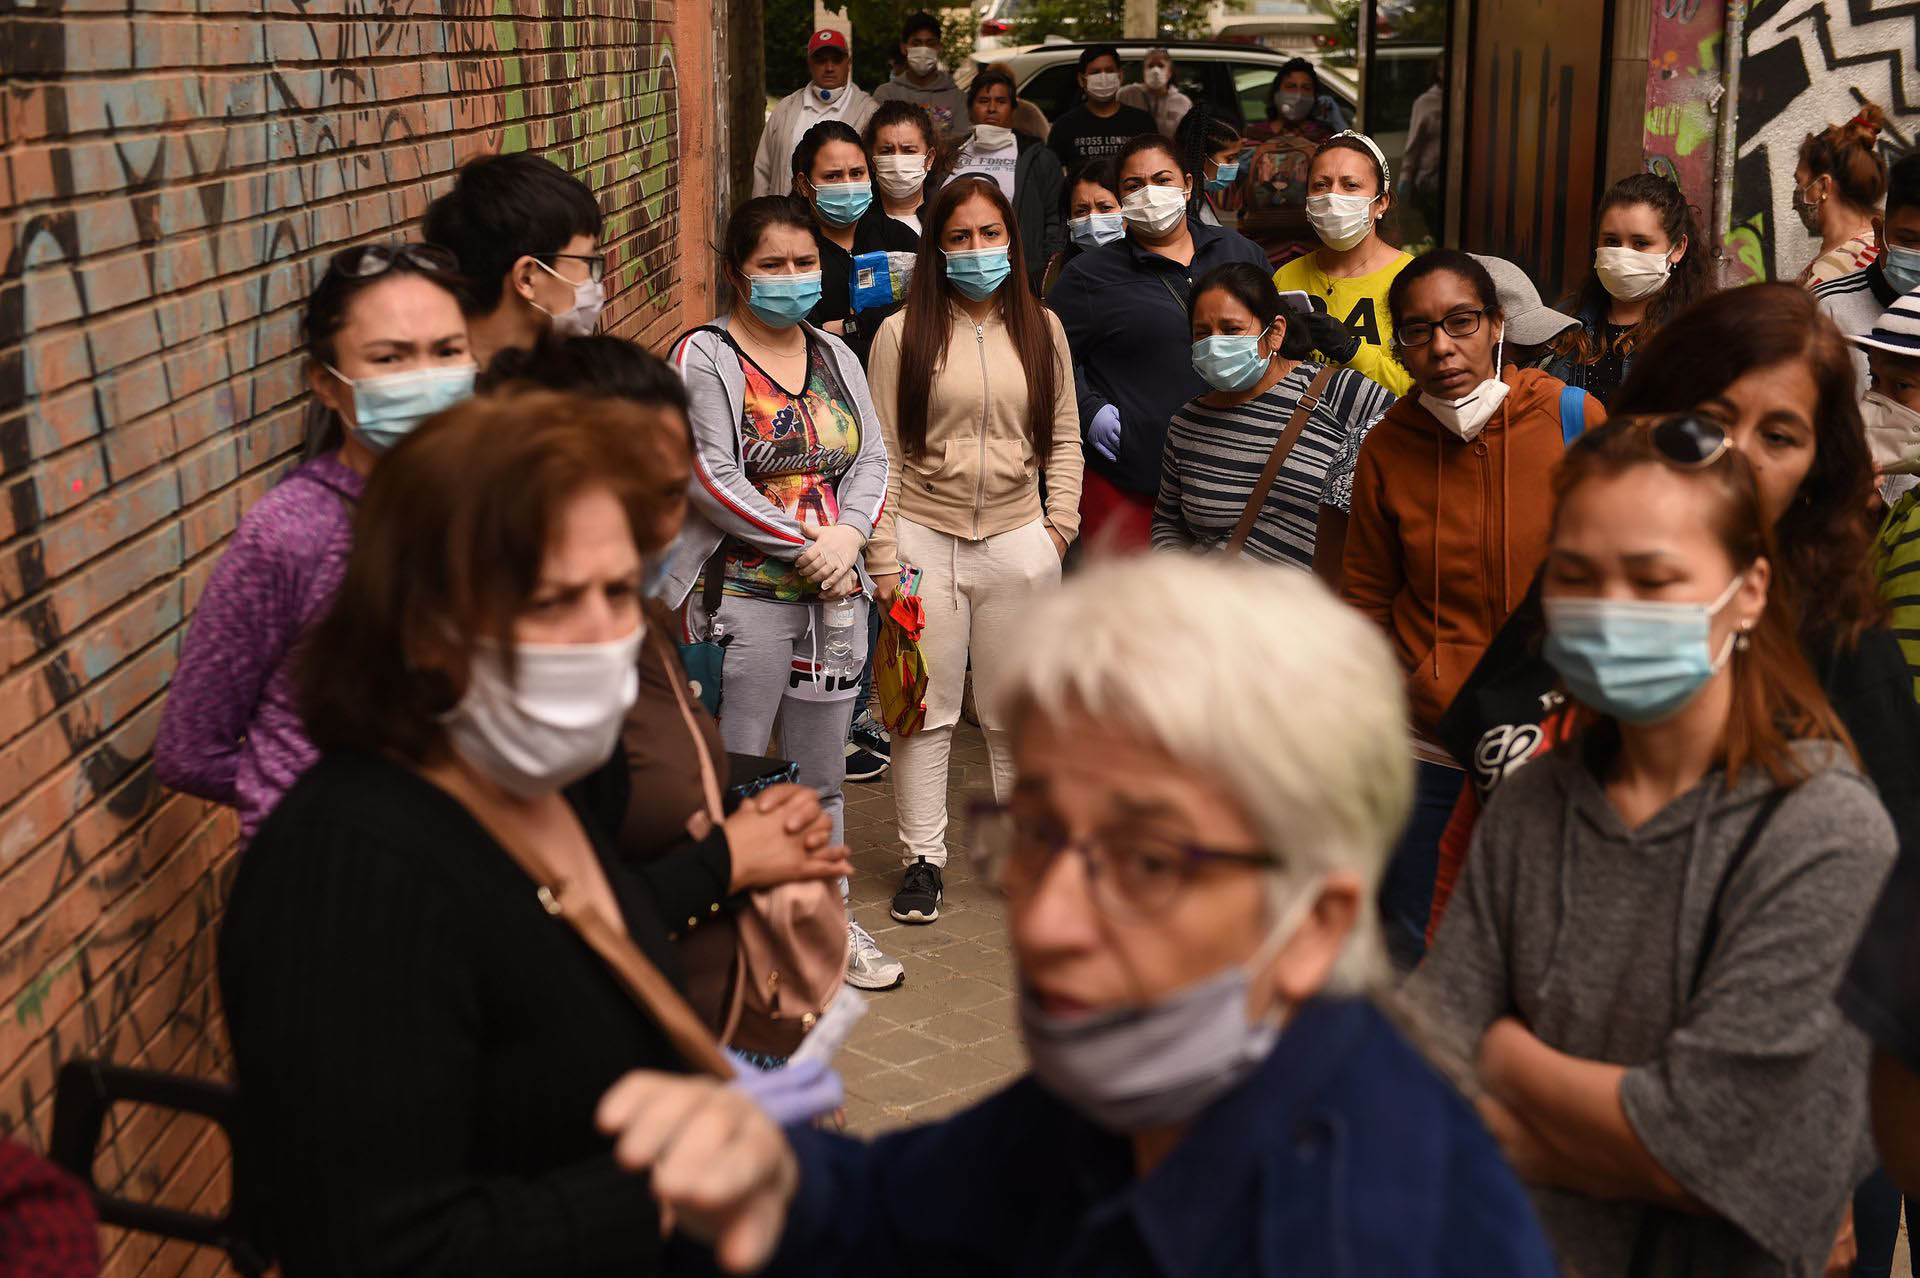 Spain Allows Some Businesses To Reopen As It Eases Coronavirus Lockdown